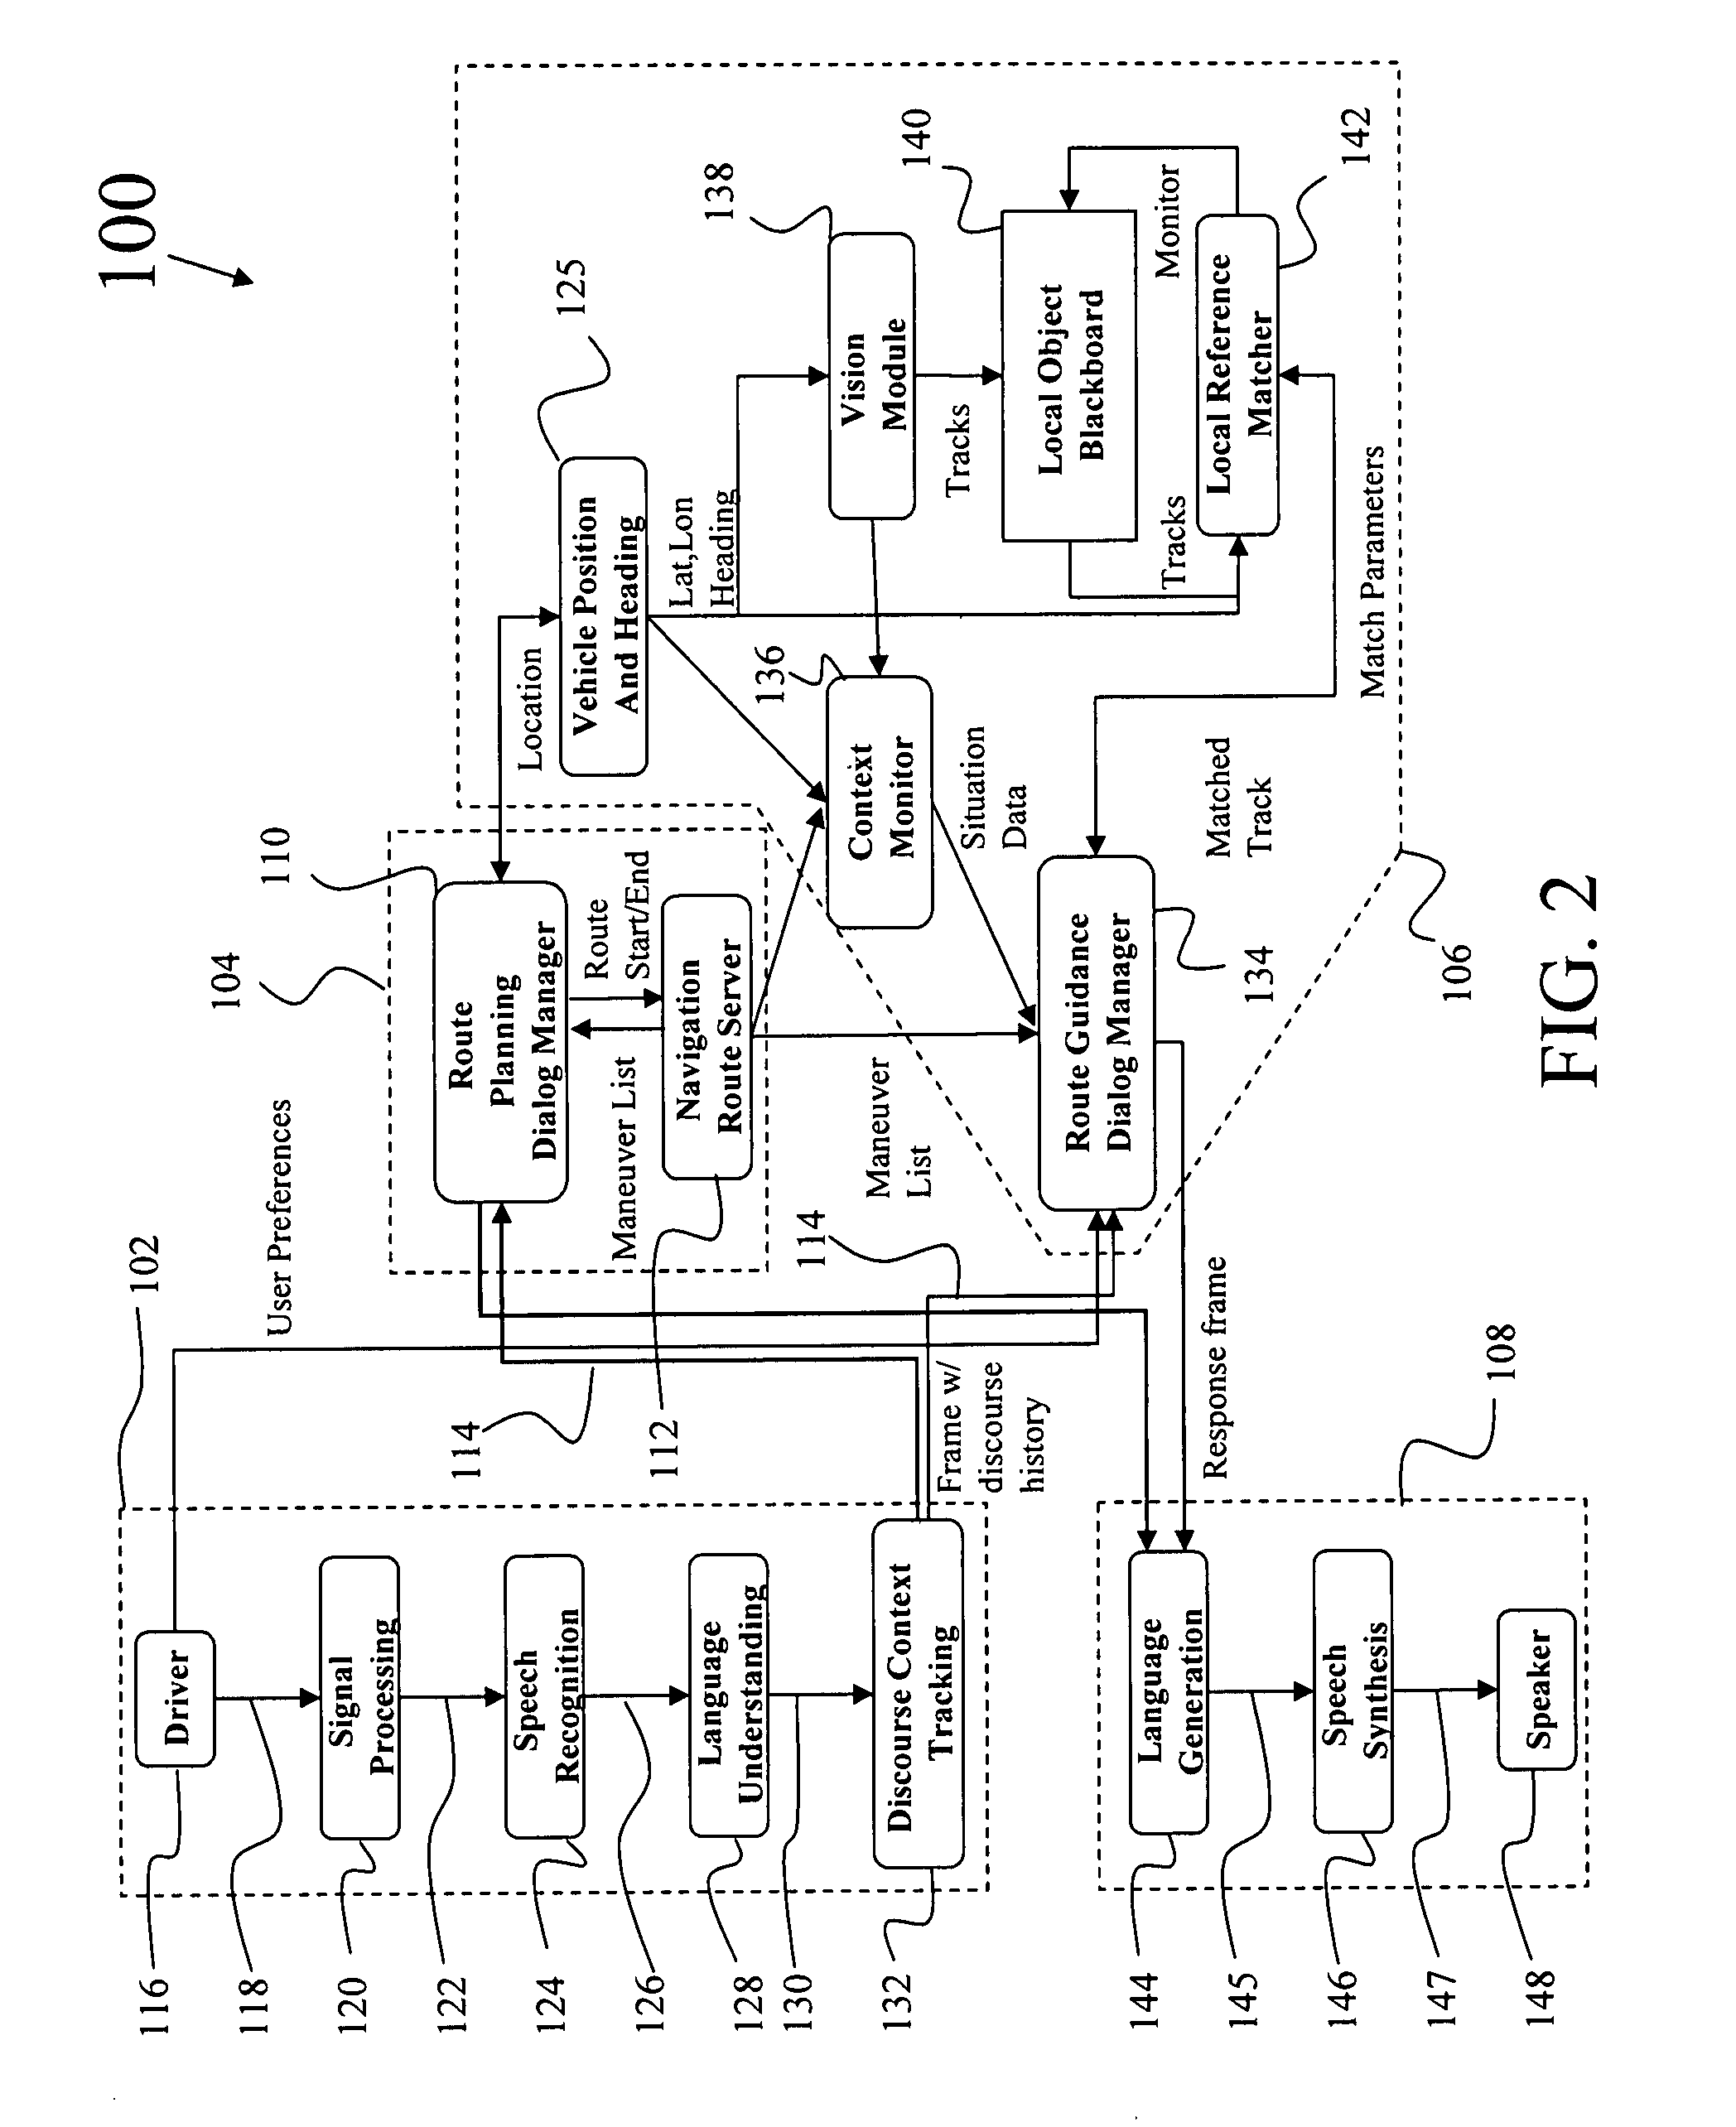 System and method for using context in navigation dialog